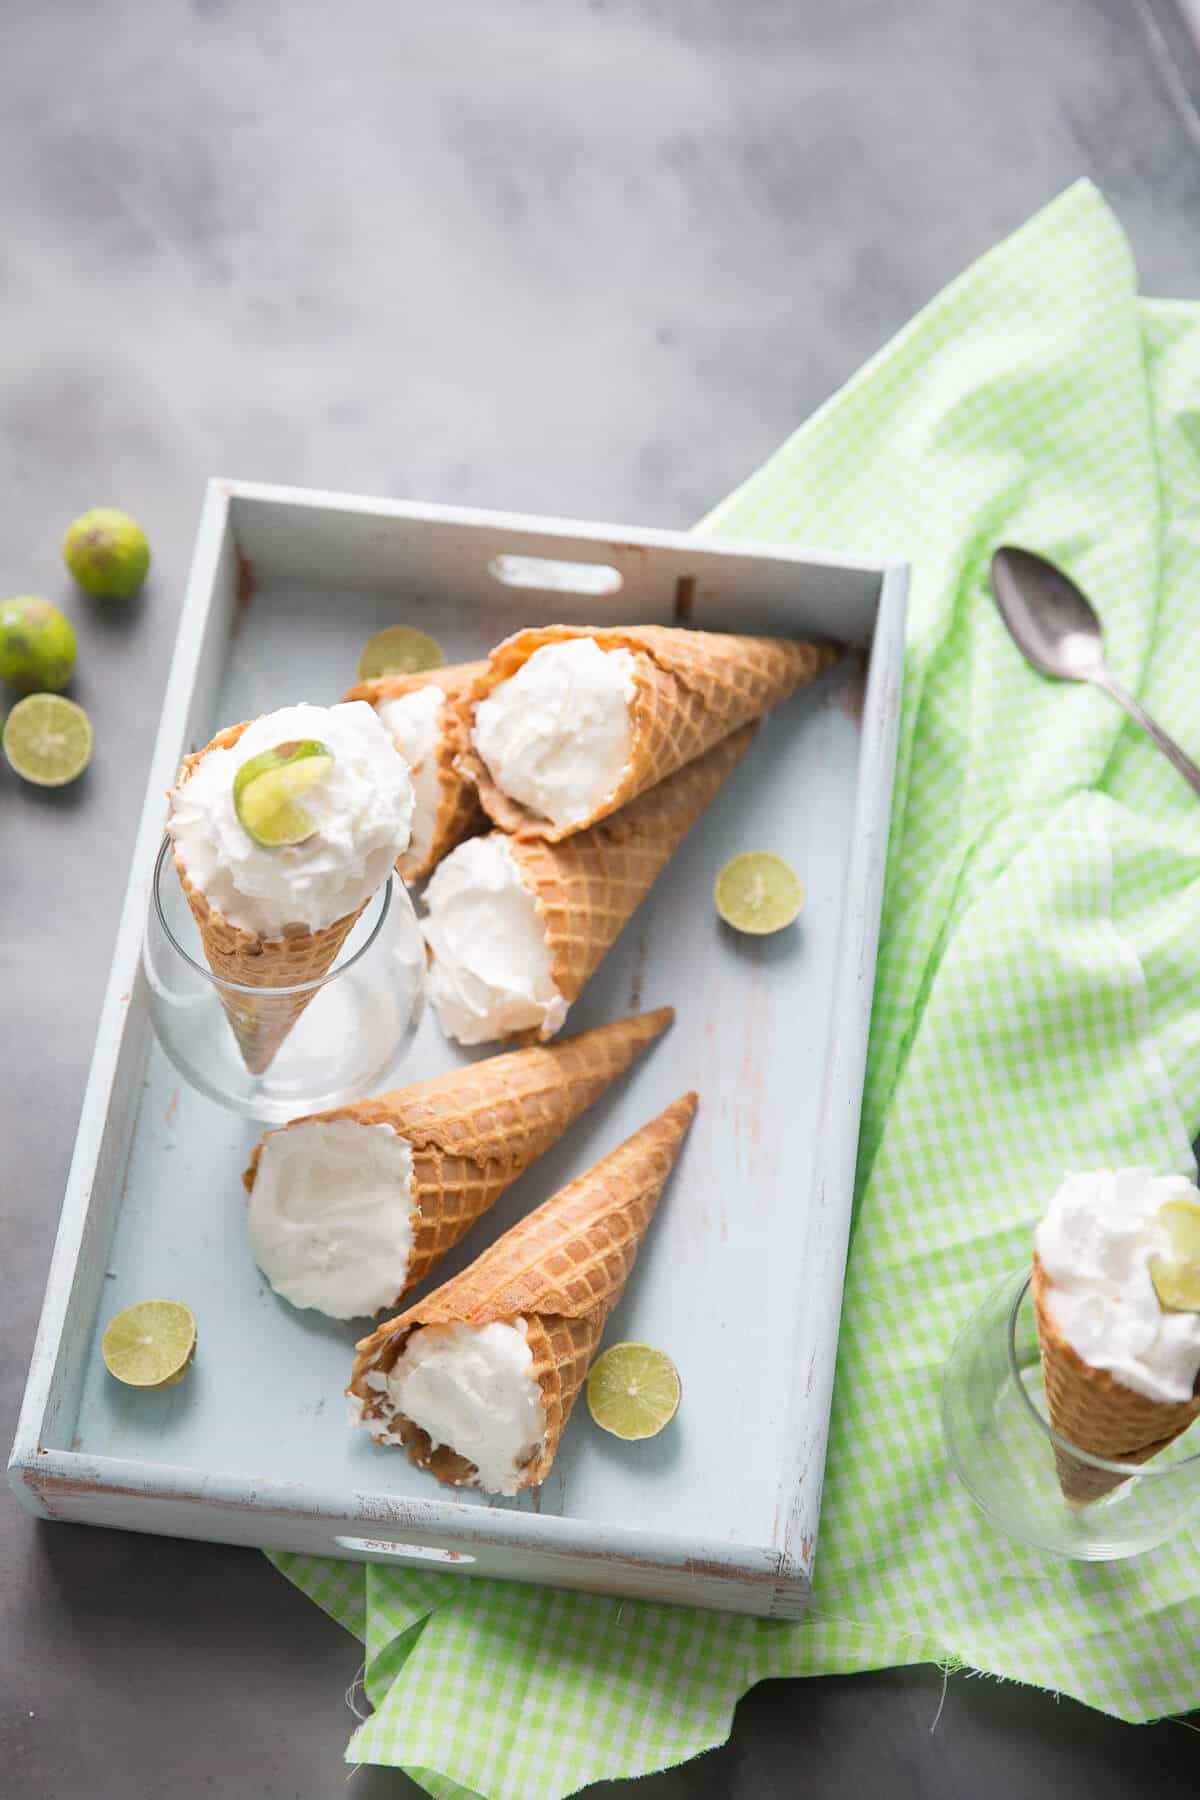 Frozen key lime pie is easy to make anytime you need something sweet! The waffle cones make this dessert fun or portable!